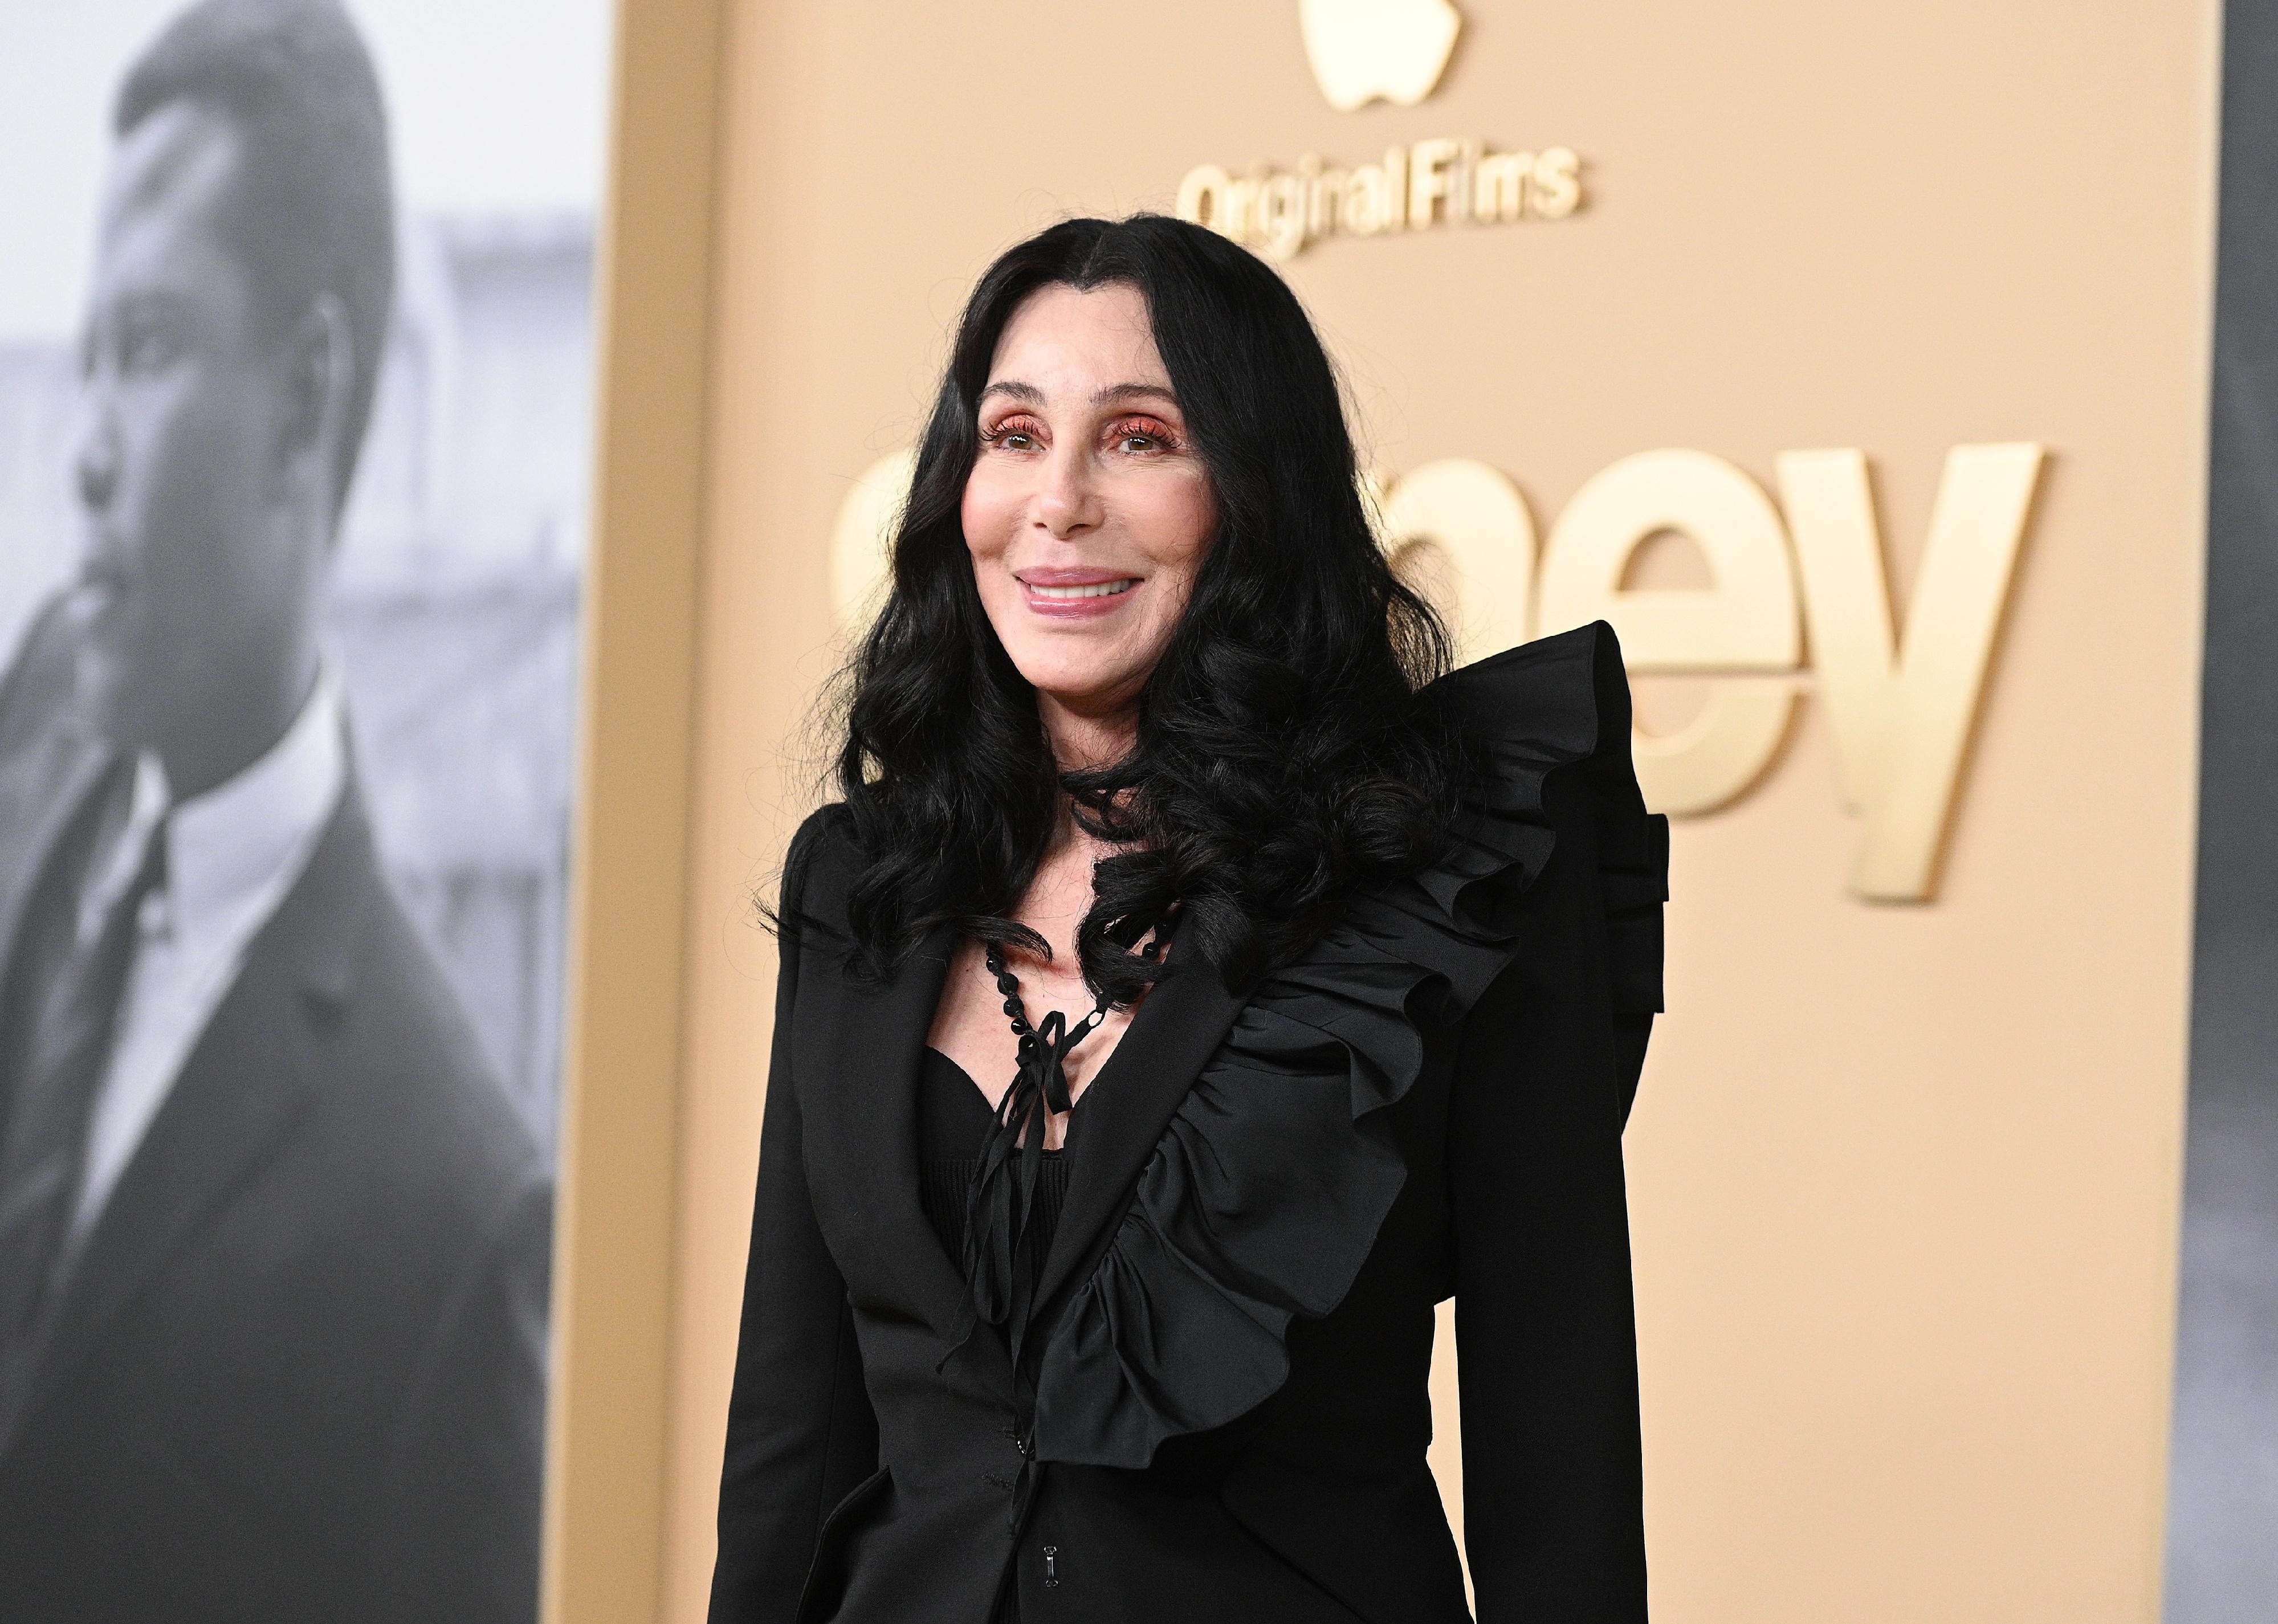 Cher at the premiere of "Sidney" held at the Academy Museum of Motion Pictures.